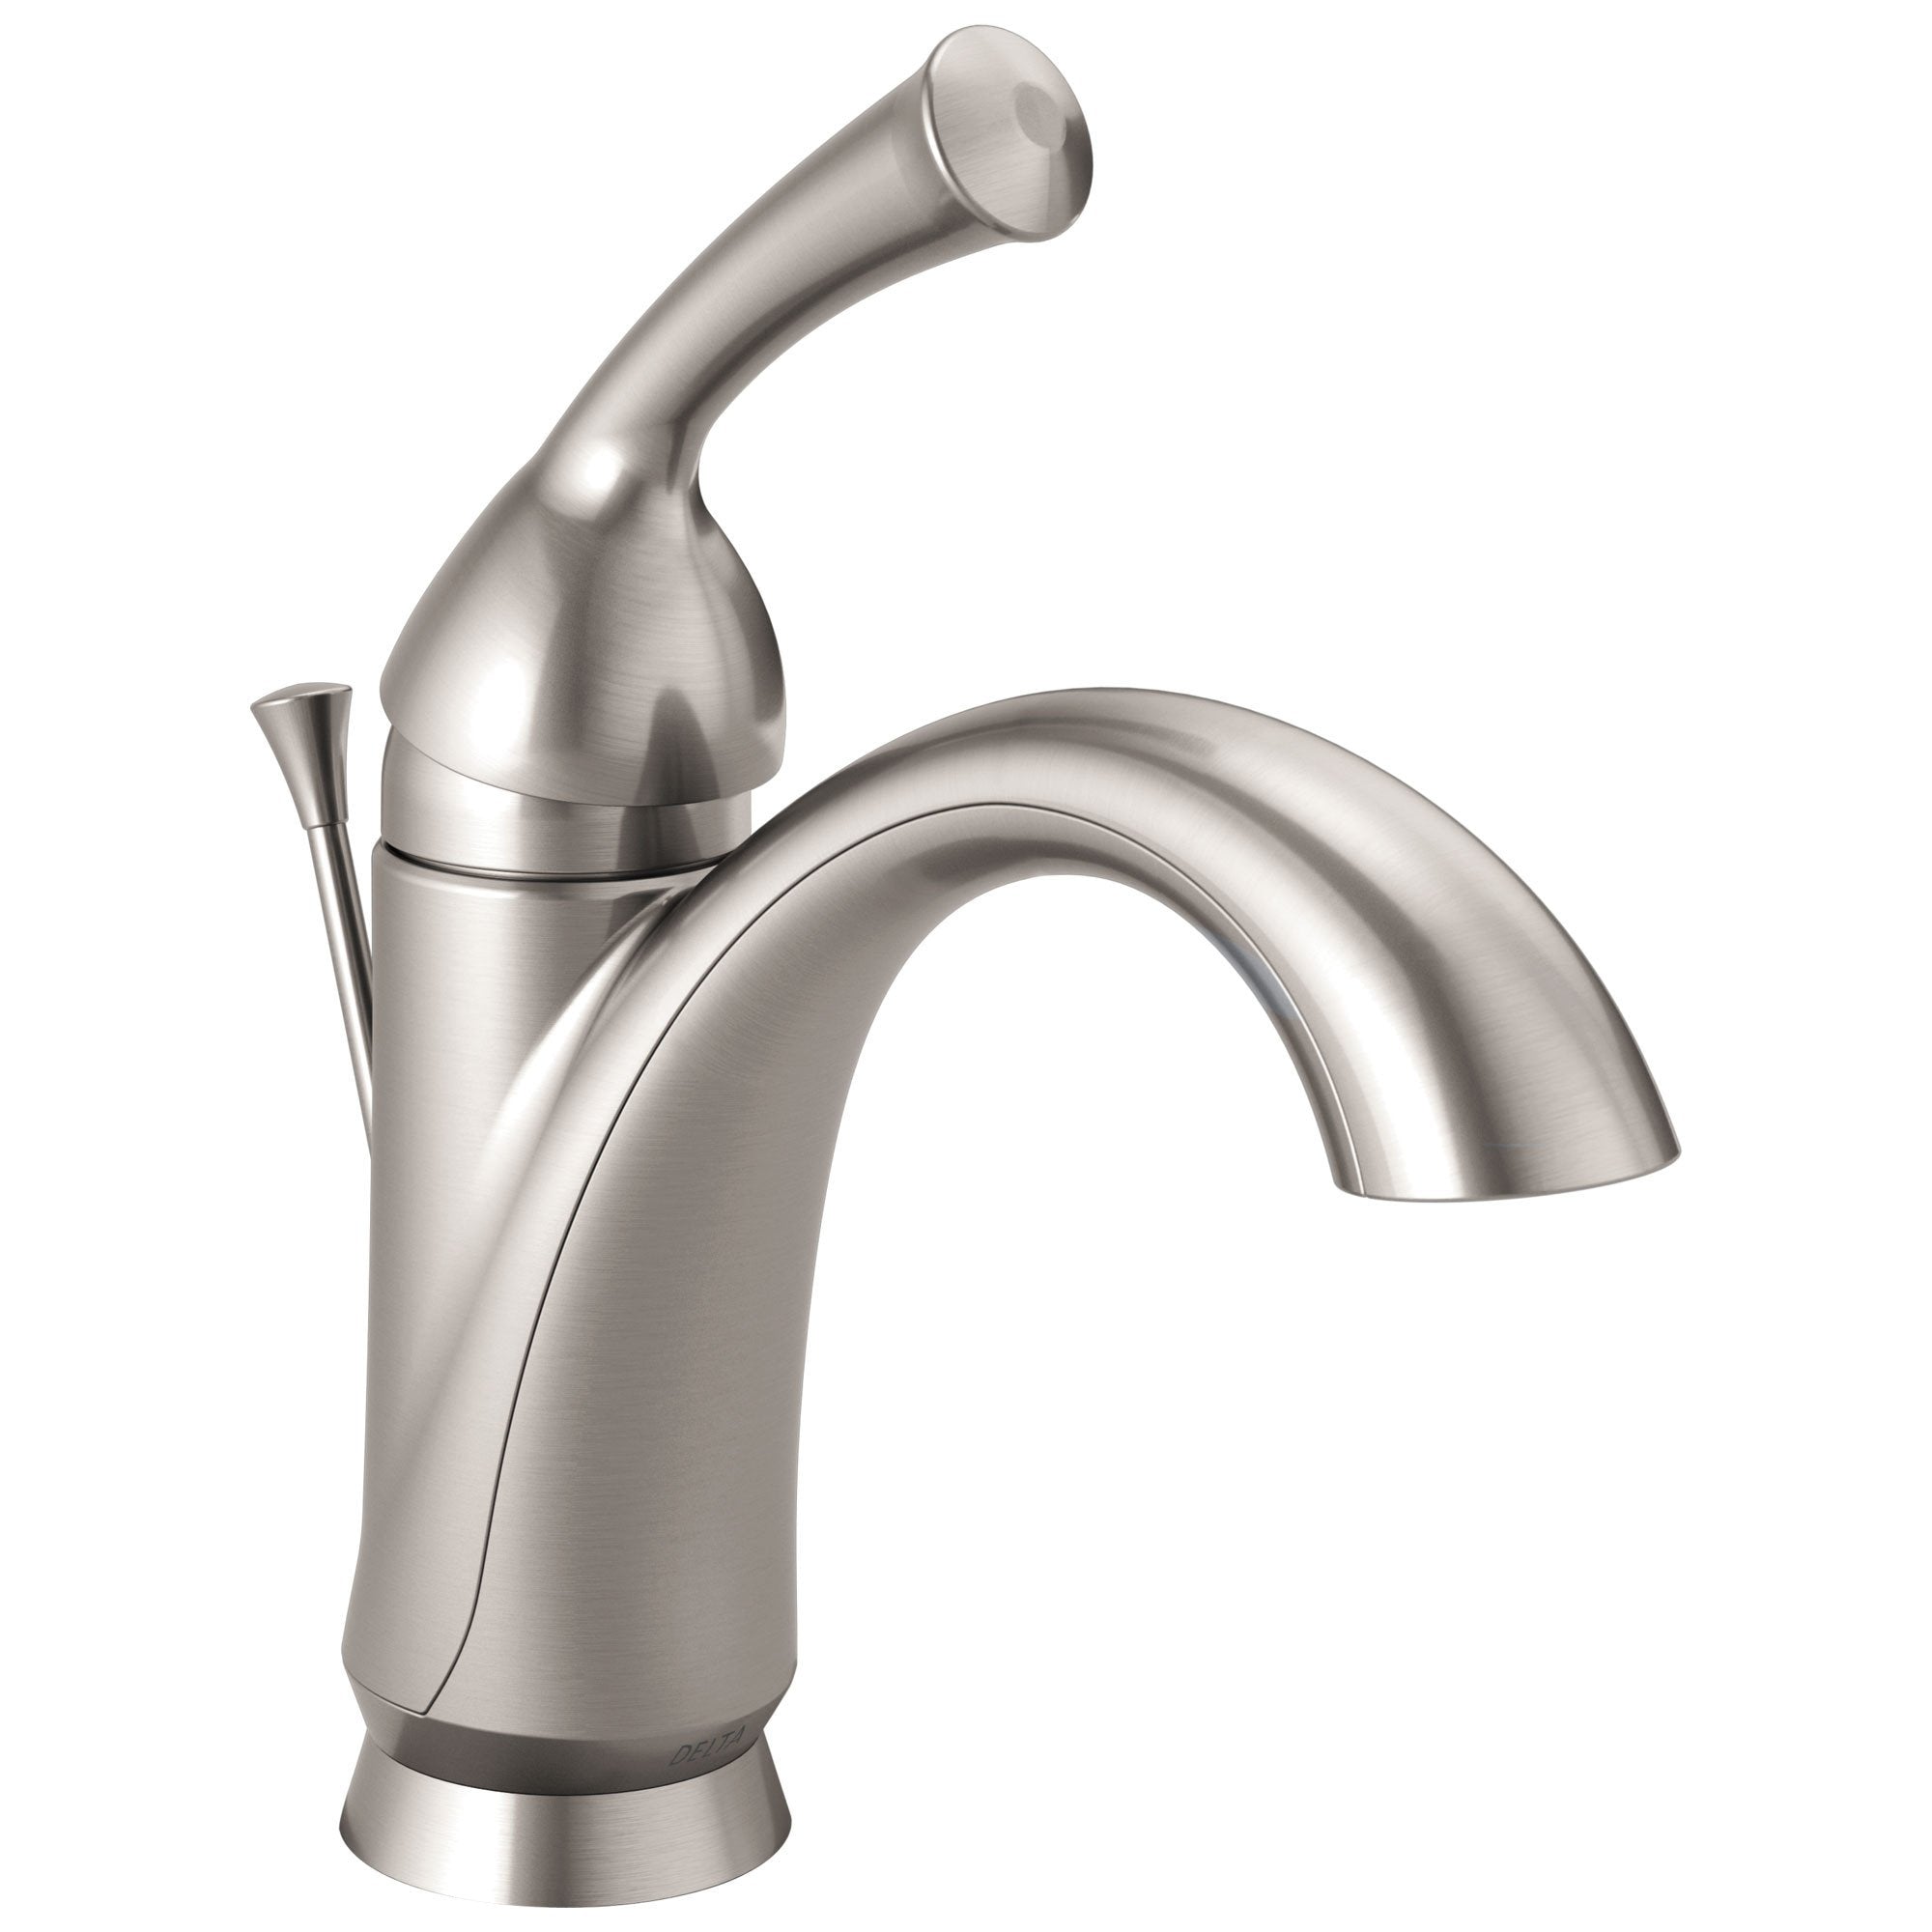 Delta Haywood Collection Stainless Steel Finish Single Handle One Hole Centerset Lavatory Faucet Includes Deck Plate for 3-Hole Installation 722474